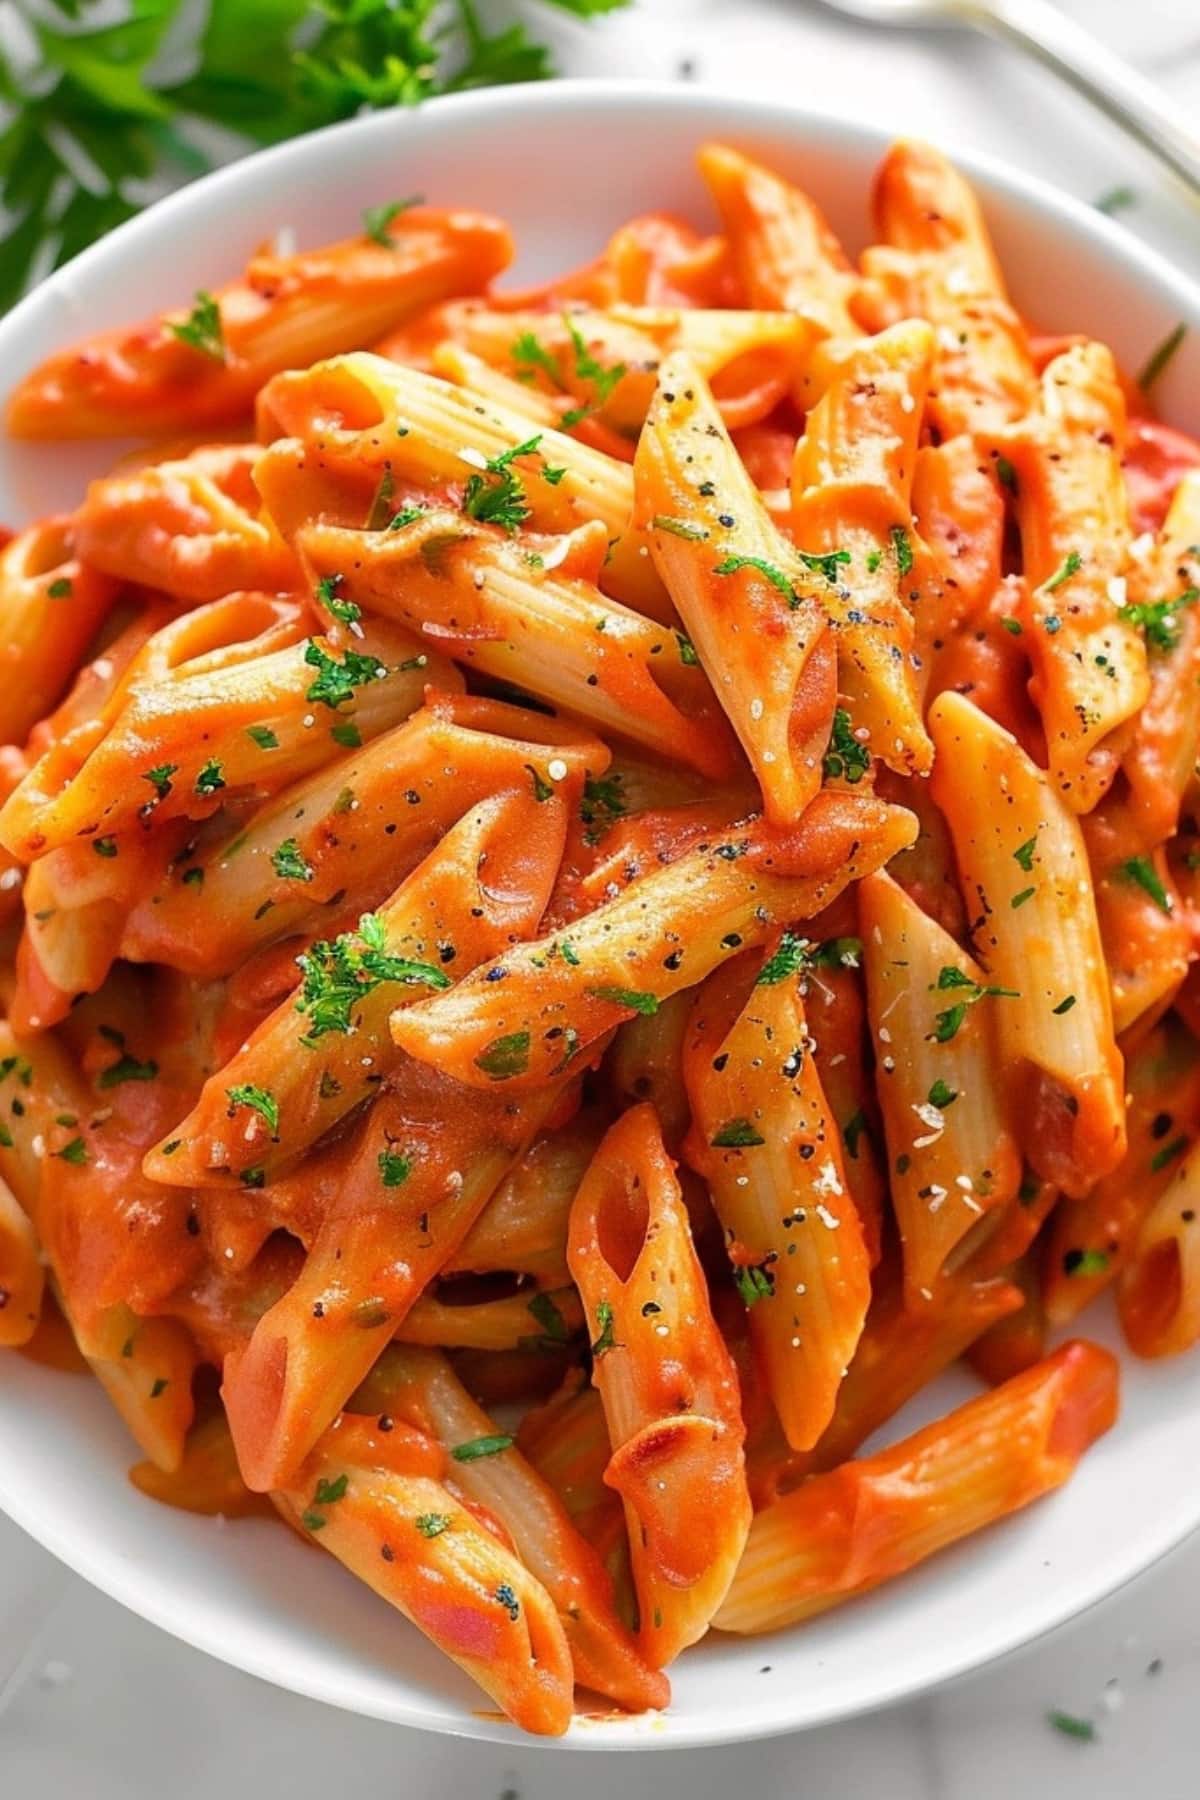 Penne pasta with cream vodka tomato sauce served on a white plate garnished with chopped parsley leaves.